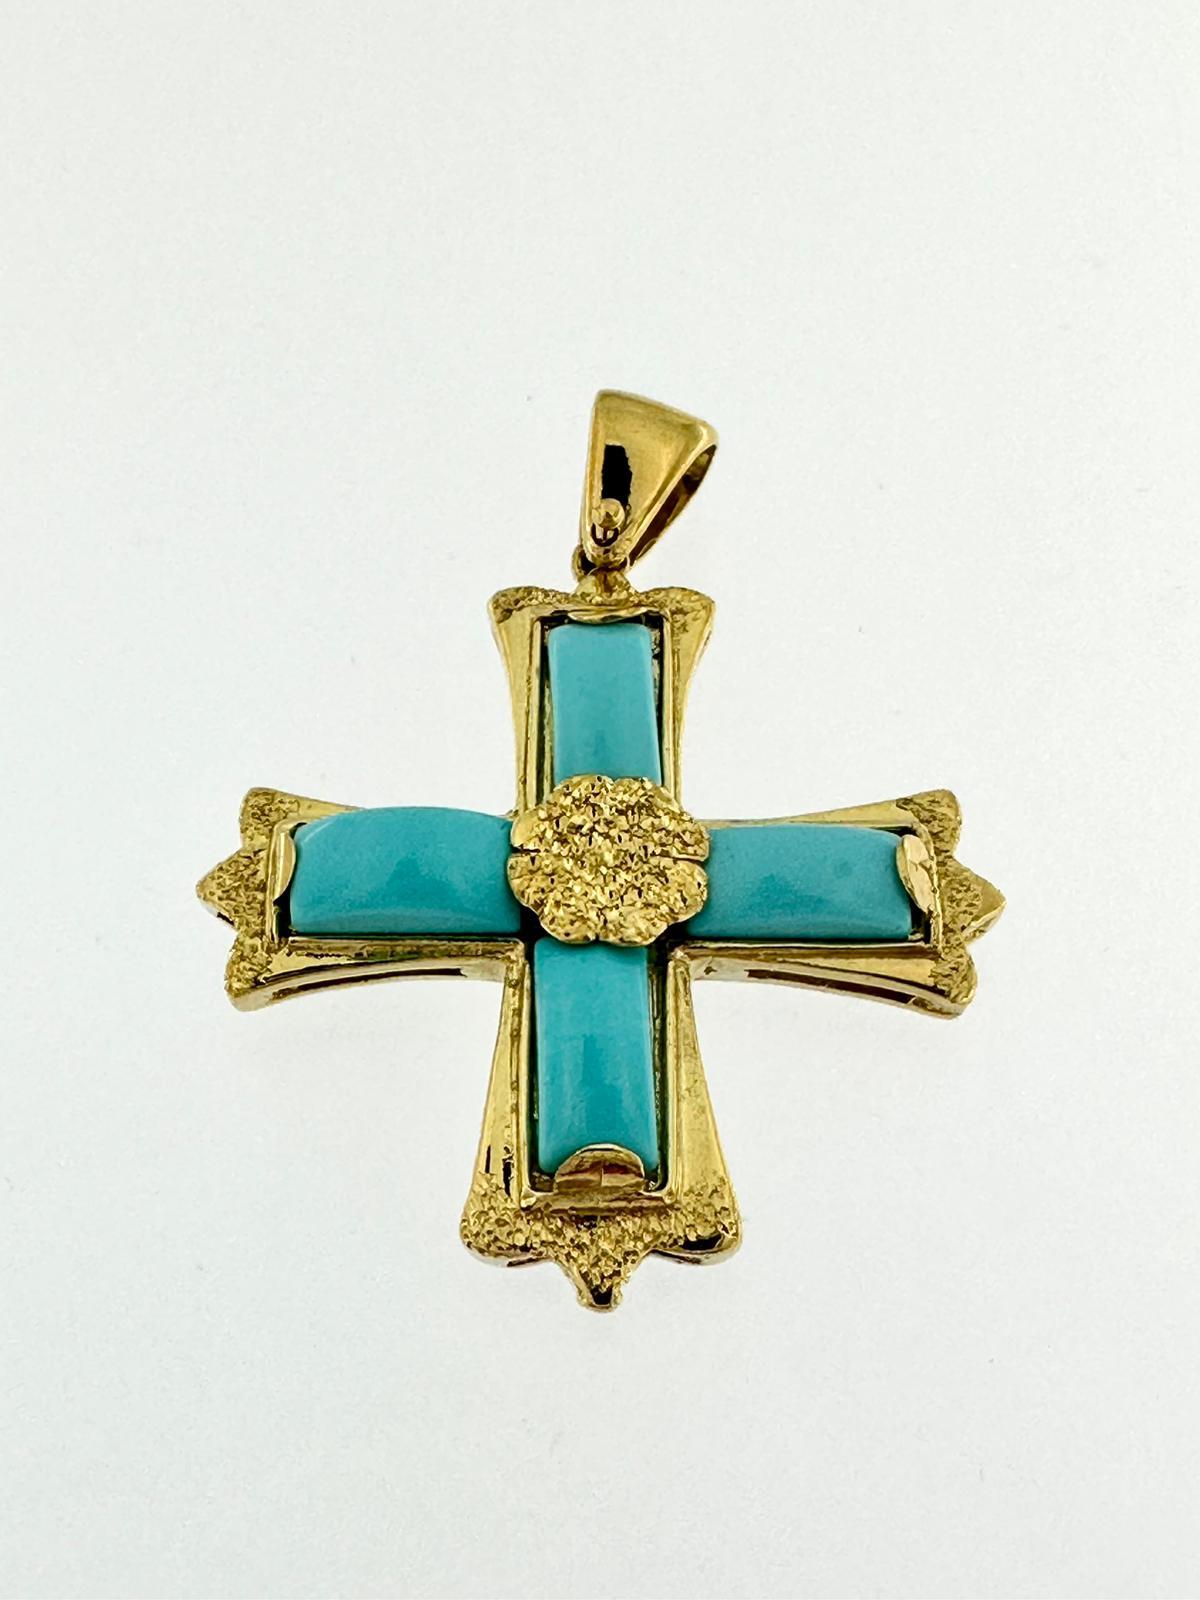 This Cross made entirely of 18kt Yellow Gold, recalls the Saint Aemilian of Cogolla's cross. Saint Aemilian was a hermit who lived in La Rioja, Spain during the VI century. Also known as the Visigoth Cross, it is a cross with anchor-shaped beams,